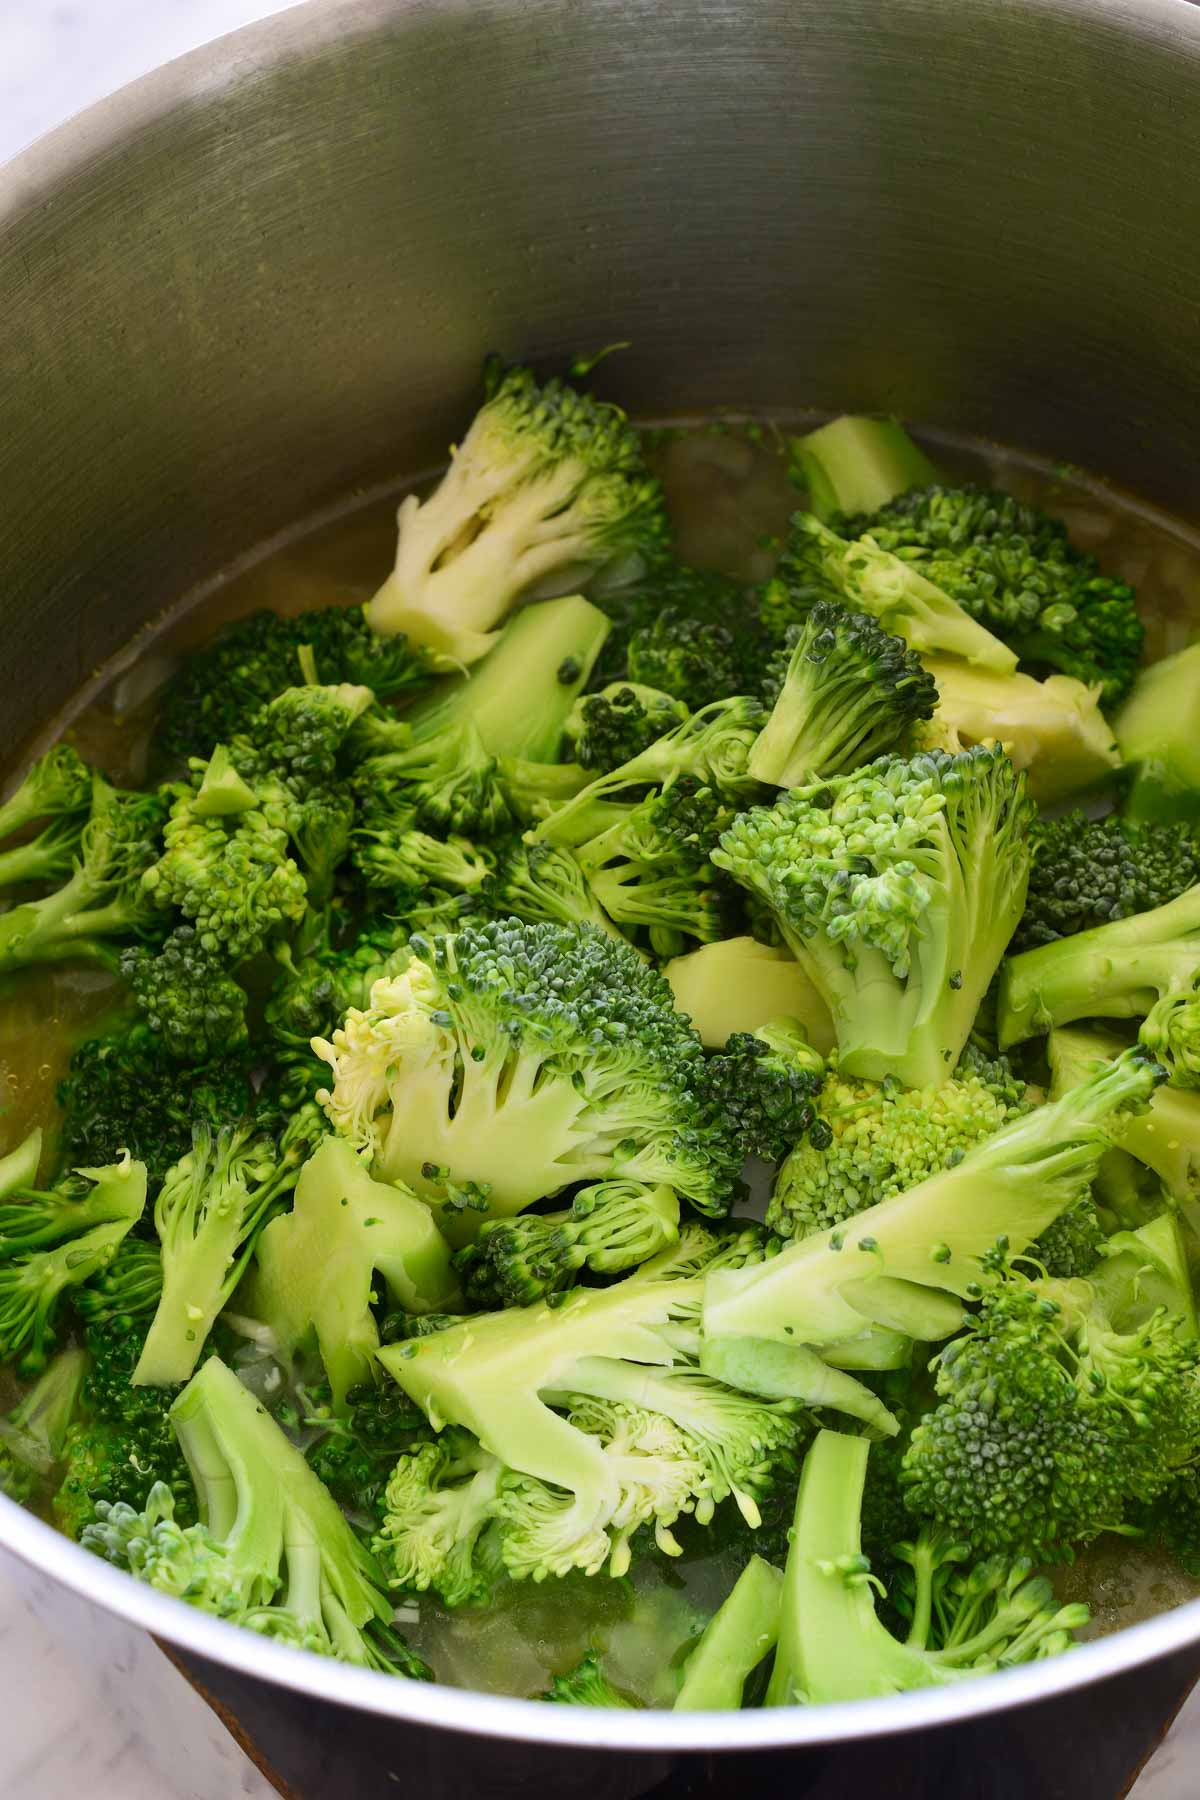 The broccoli florets in the pot.